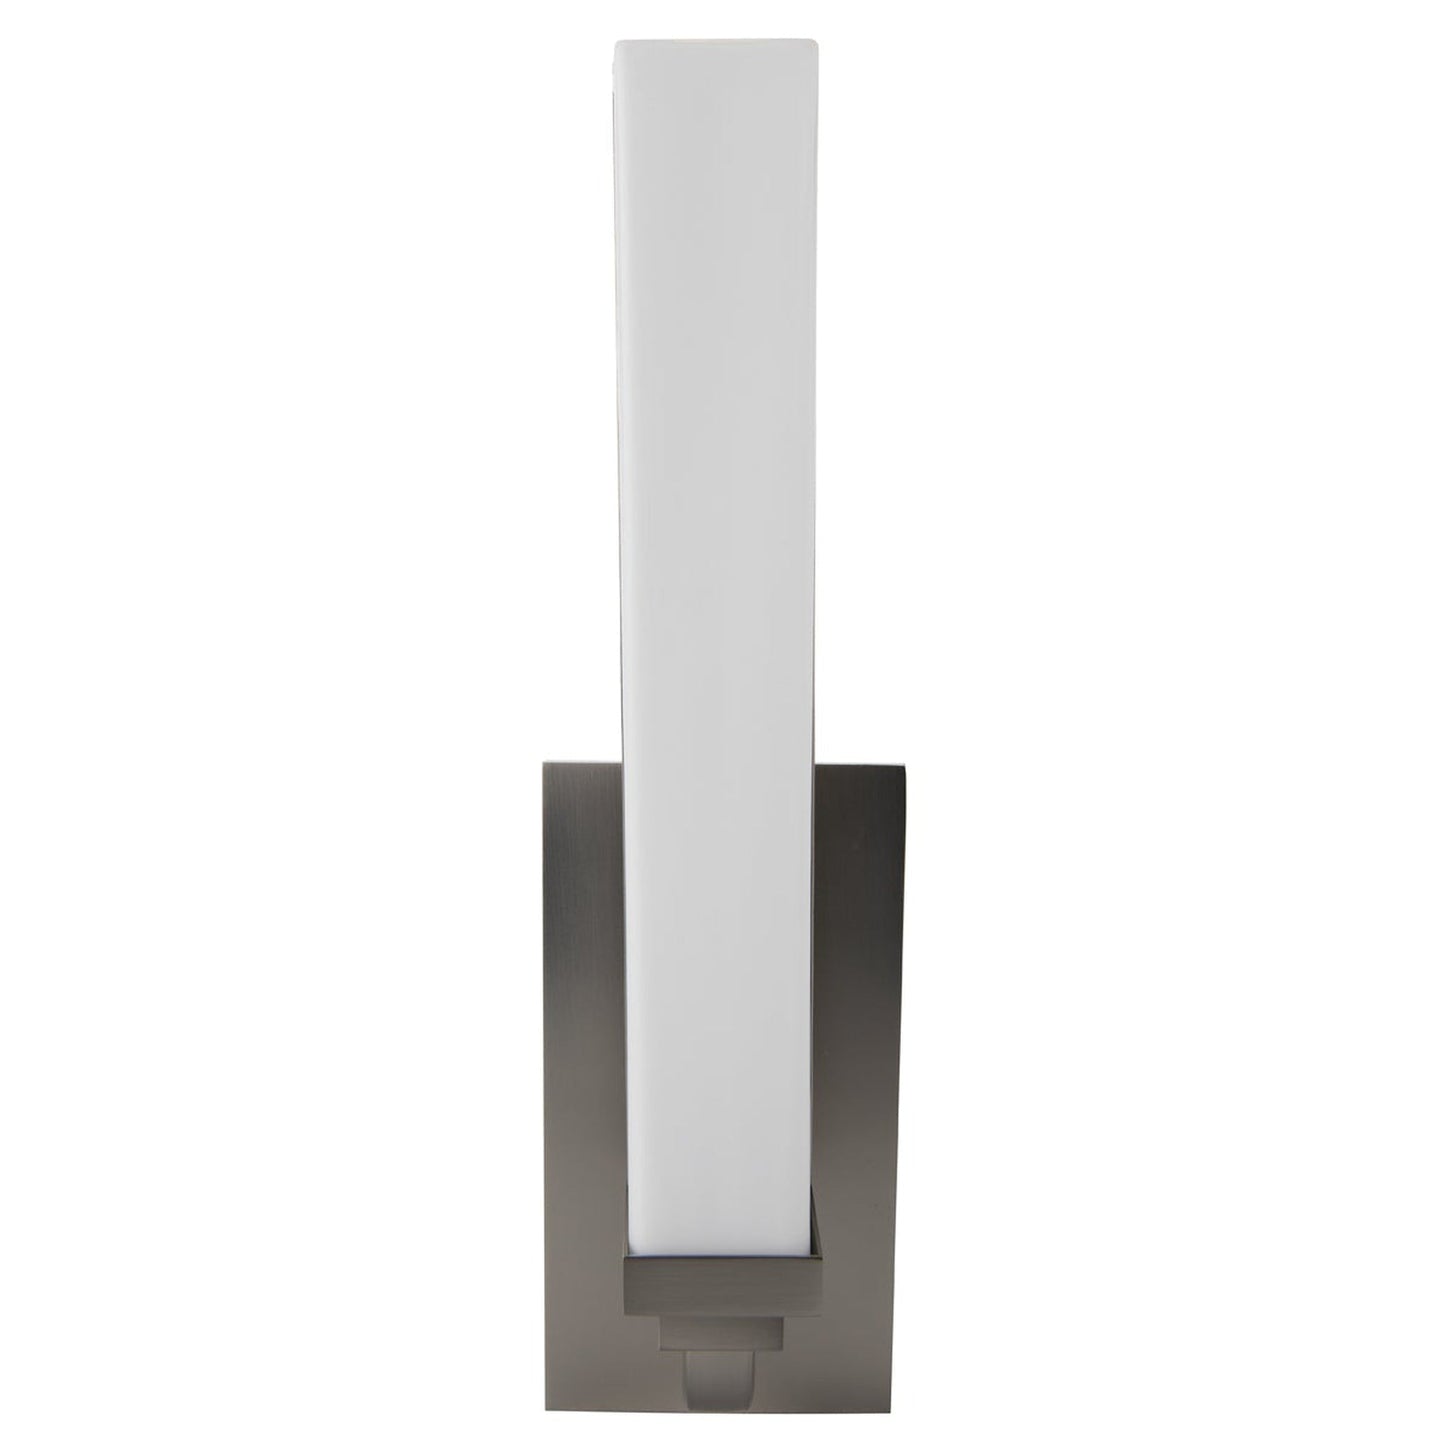 Norwell Lighting Tetris 16" x 4" 1-Light Brushed Nickel LED Vanity Sconce With Matte Opal Diffuser